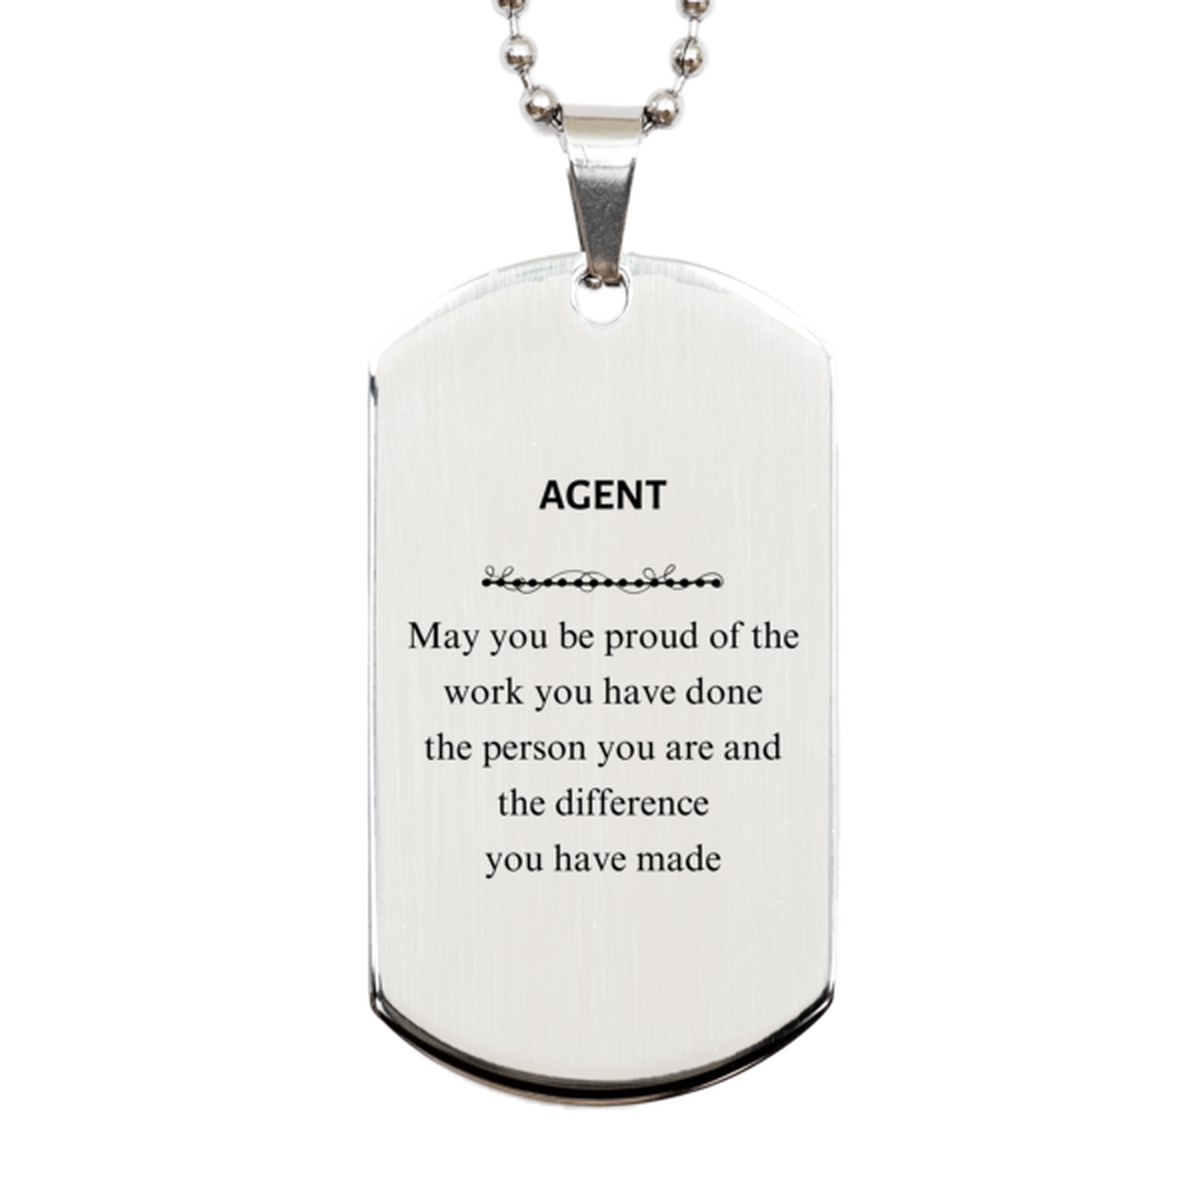 Agent May you be proud of the work you have done, Retirement Agent Silver Dog Tag for Colleague Appreciation Gifts Amazing for Agent